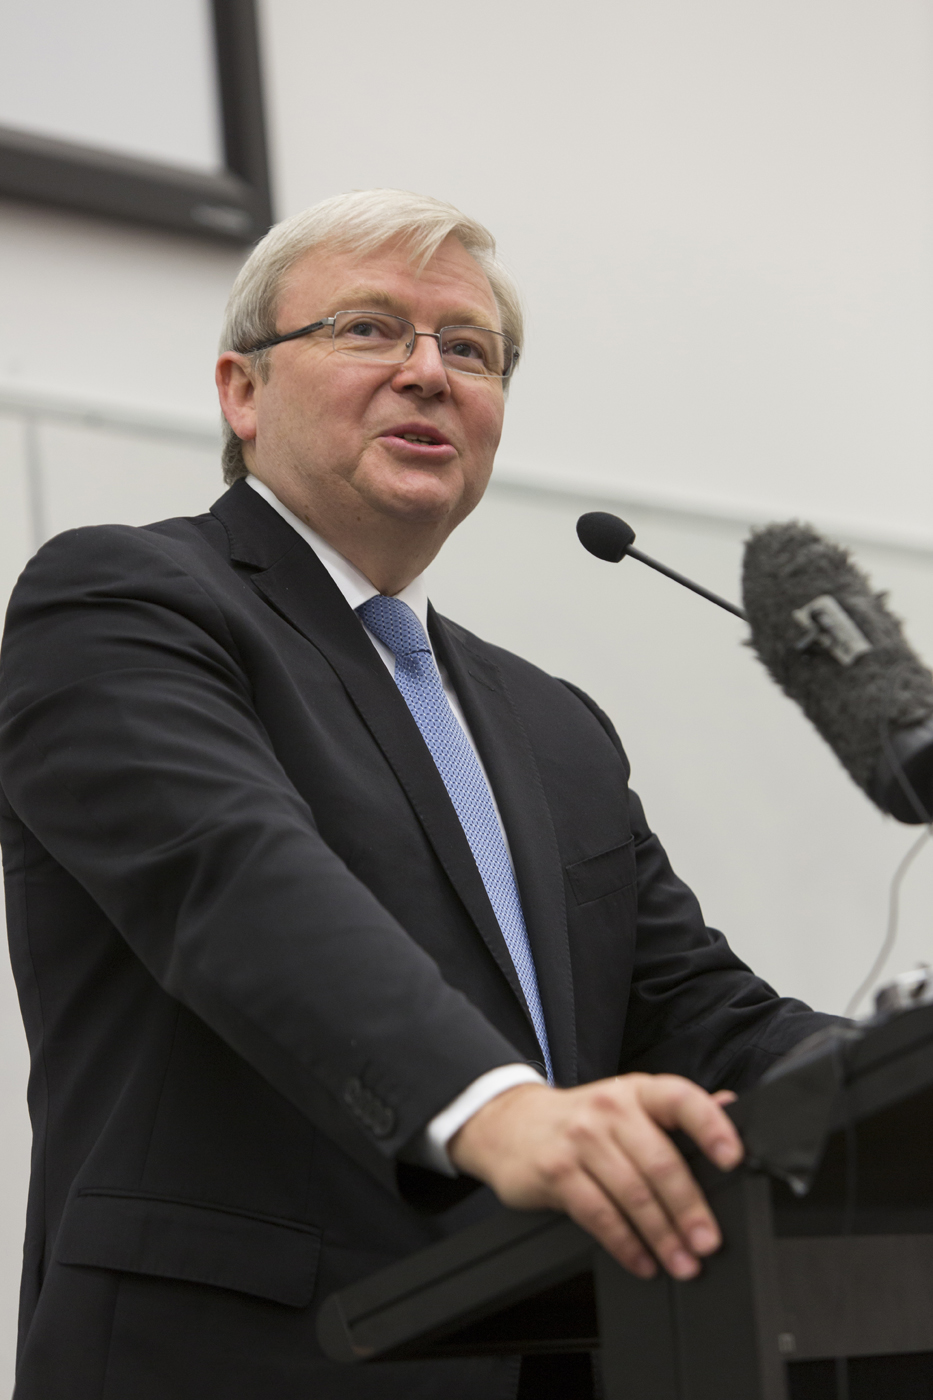 Kevin Rudd addressing Griffith group at podium.